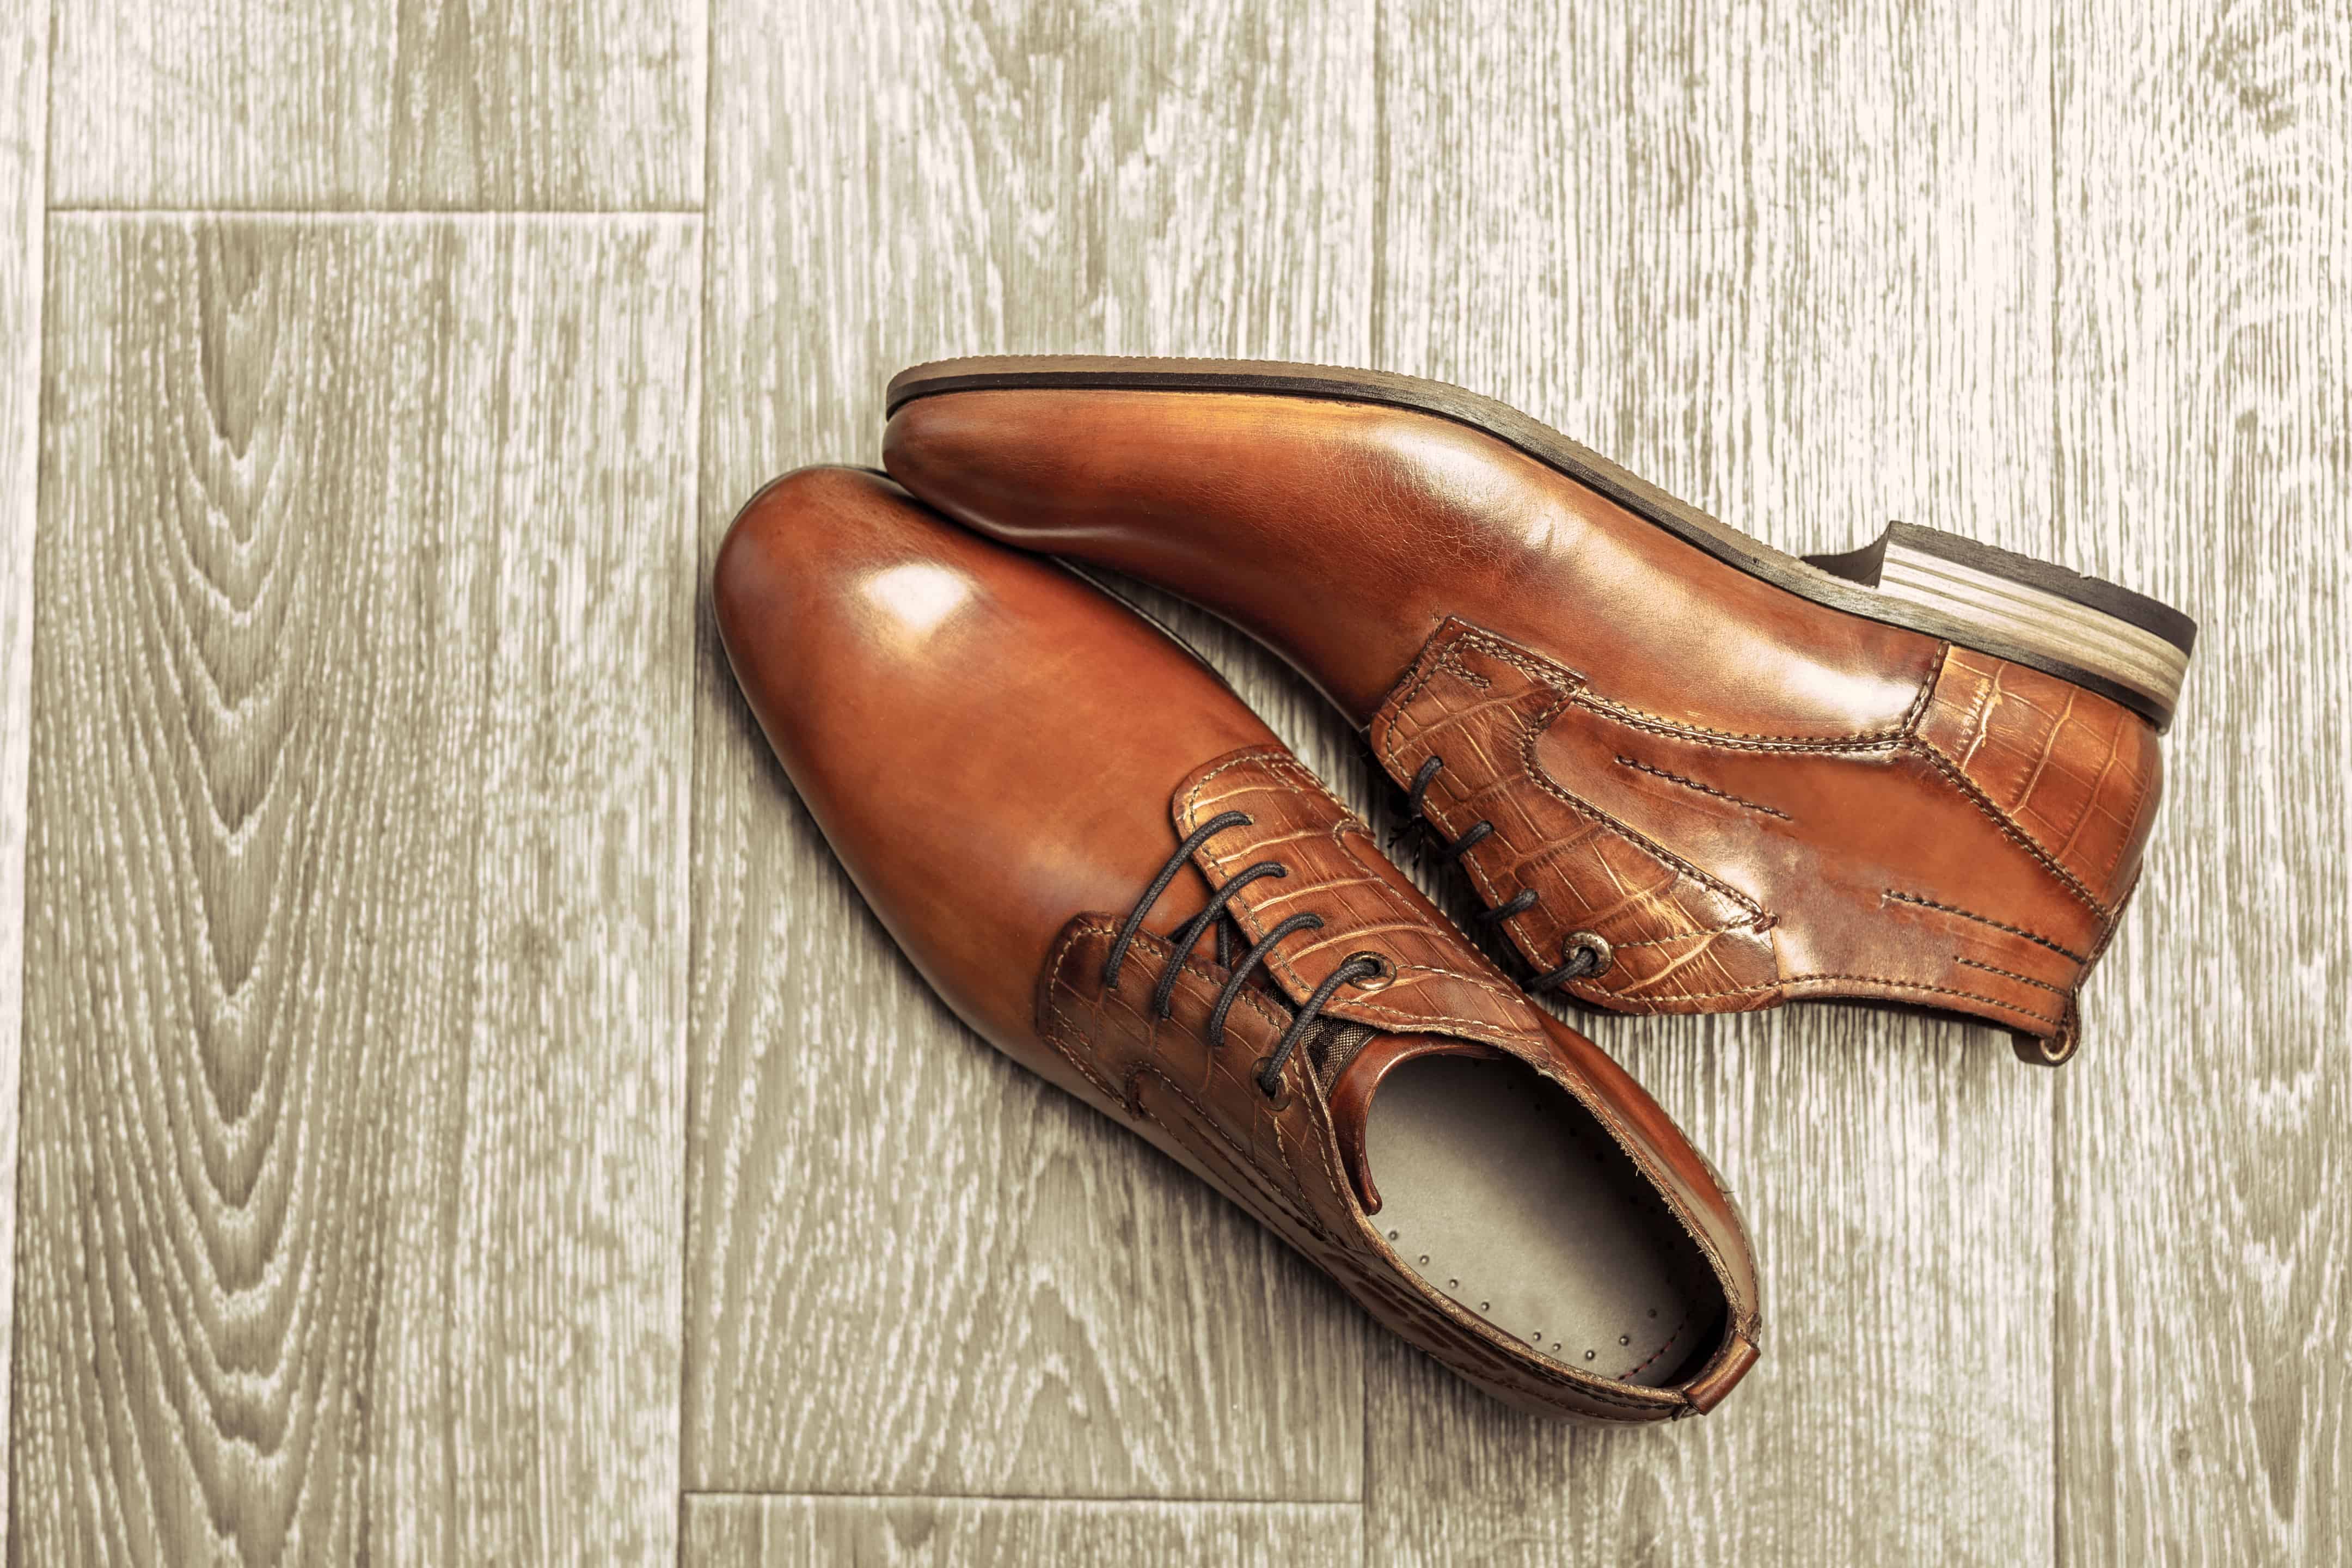 How to Pack Shoes - Fashion concept with male shoes on wooden background - Mayflower